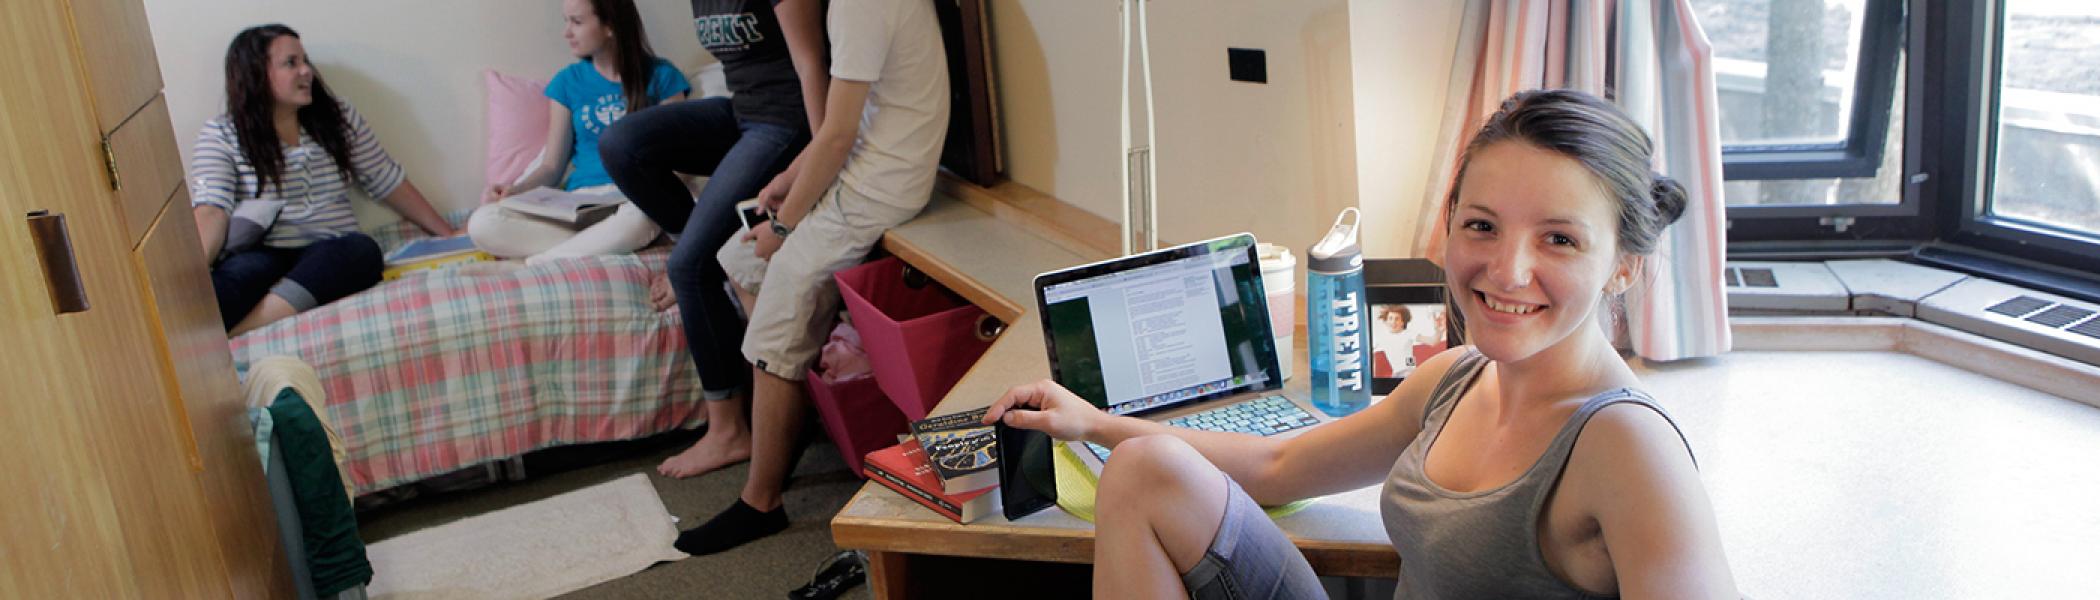 Student sitting at her desk in her Lady Eaton College residence room. Other students lounge on her bed in the background.